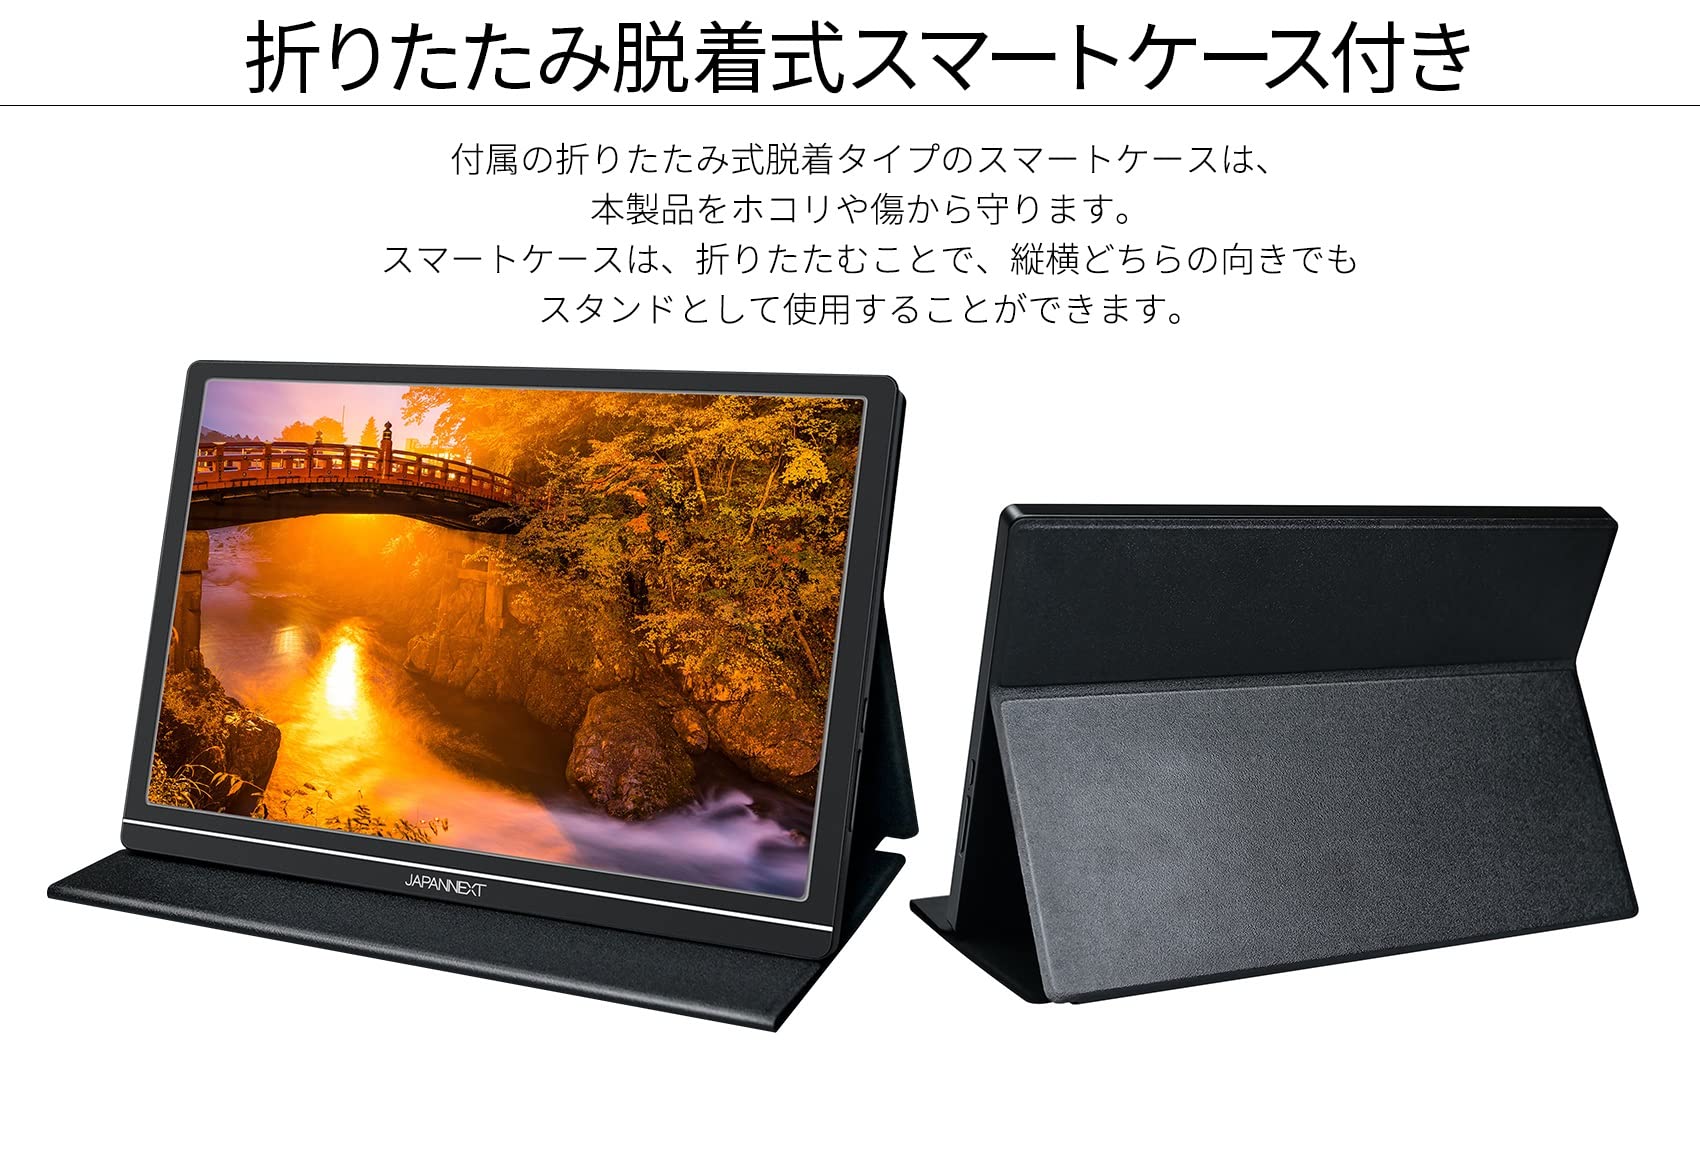 JapanNext JN-MD-IPS1012HDR 10.1-Inch 1920x1200 Resolution Mobile Monitor, USB Type-C Mini HDMI